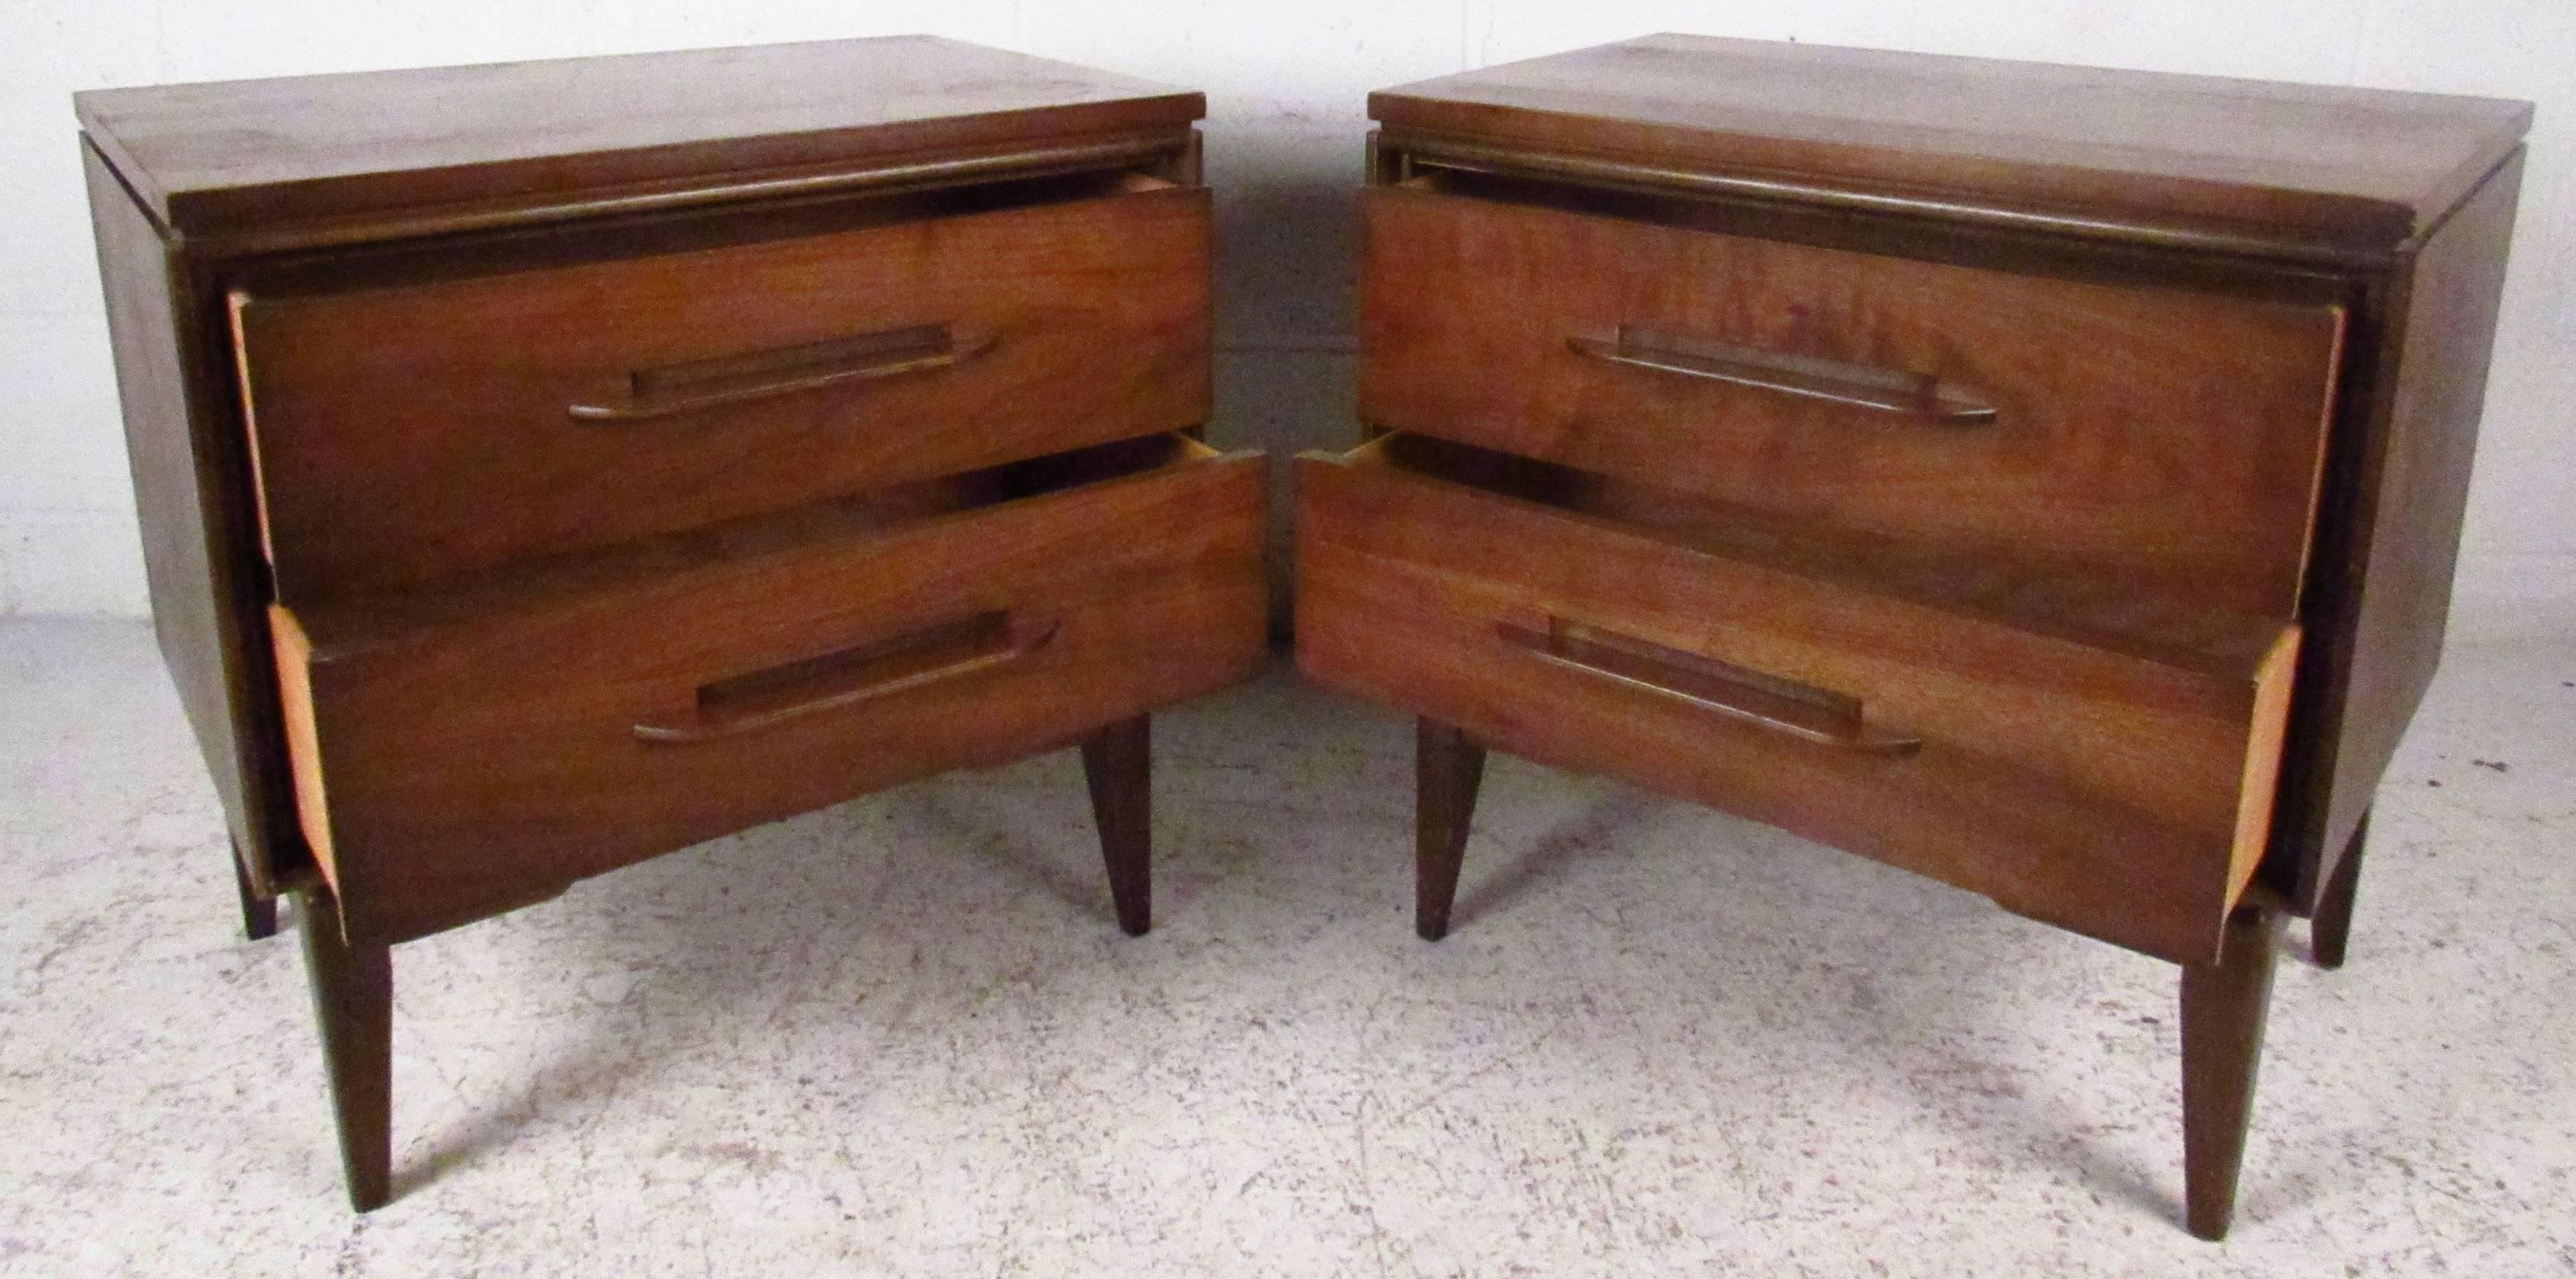 Two vintage-modern nightstands featuring sculpted handles, rich walnut grain and tapered legs. Manufactured by Bassett Furniture.

Please confirm item location NY or NJ with dealer.